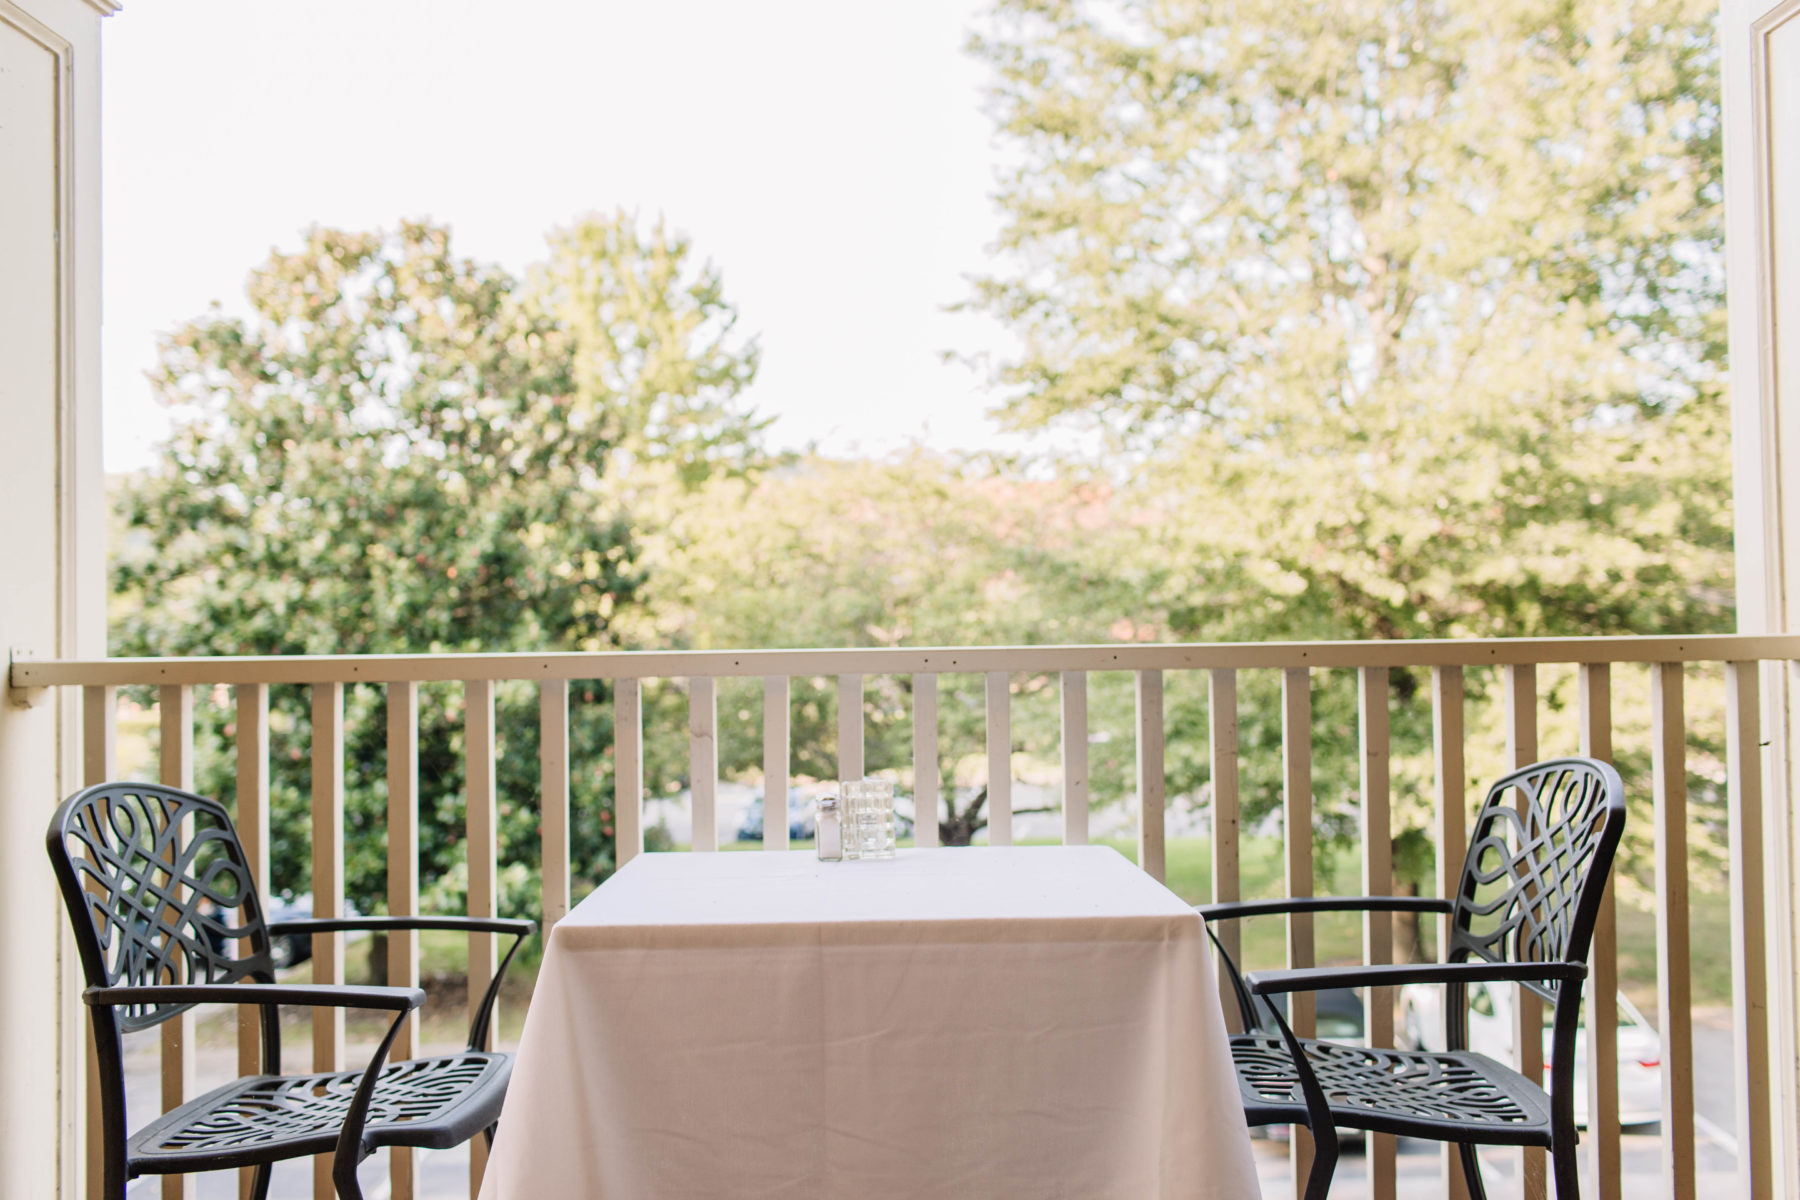 Room Options for Your Rehearsal Dinner at Mere Bulles featured on Nashville Bride Guide